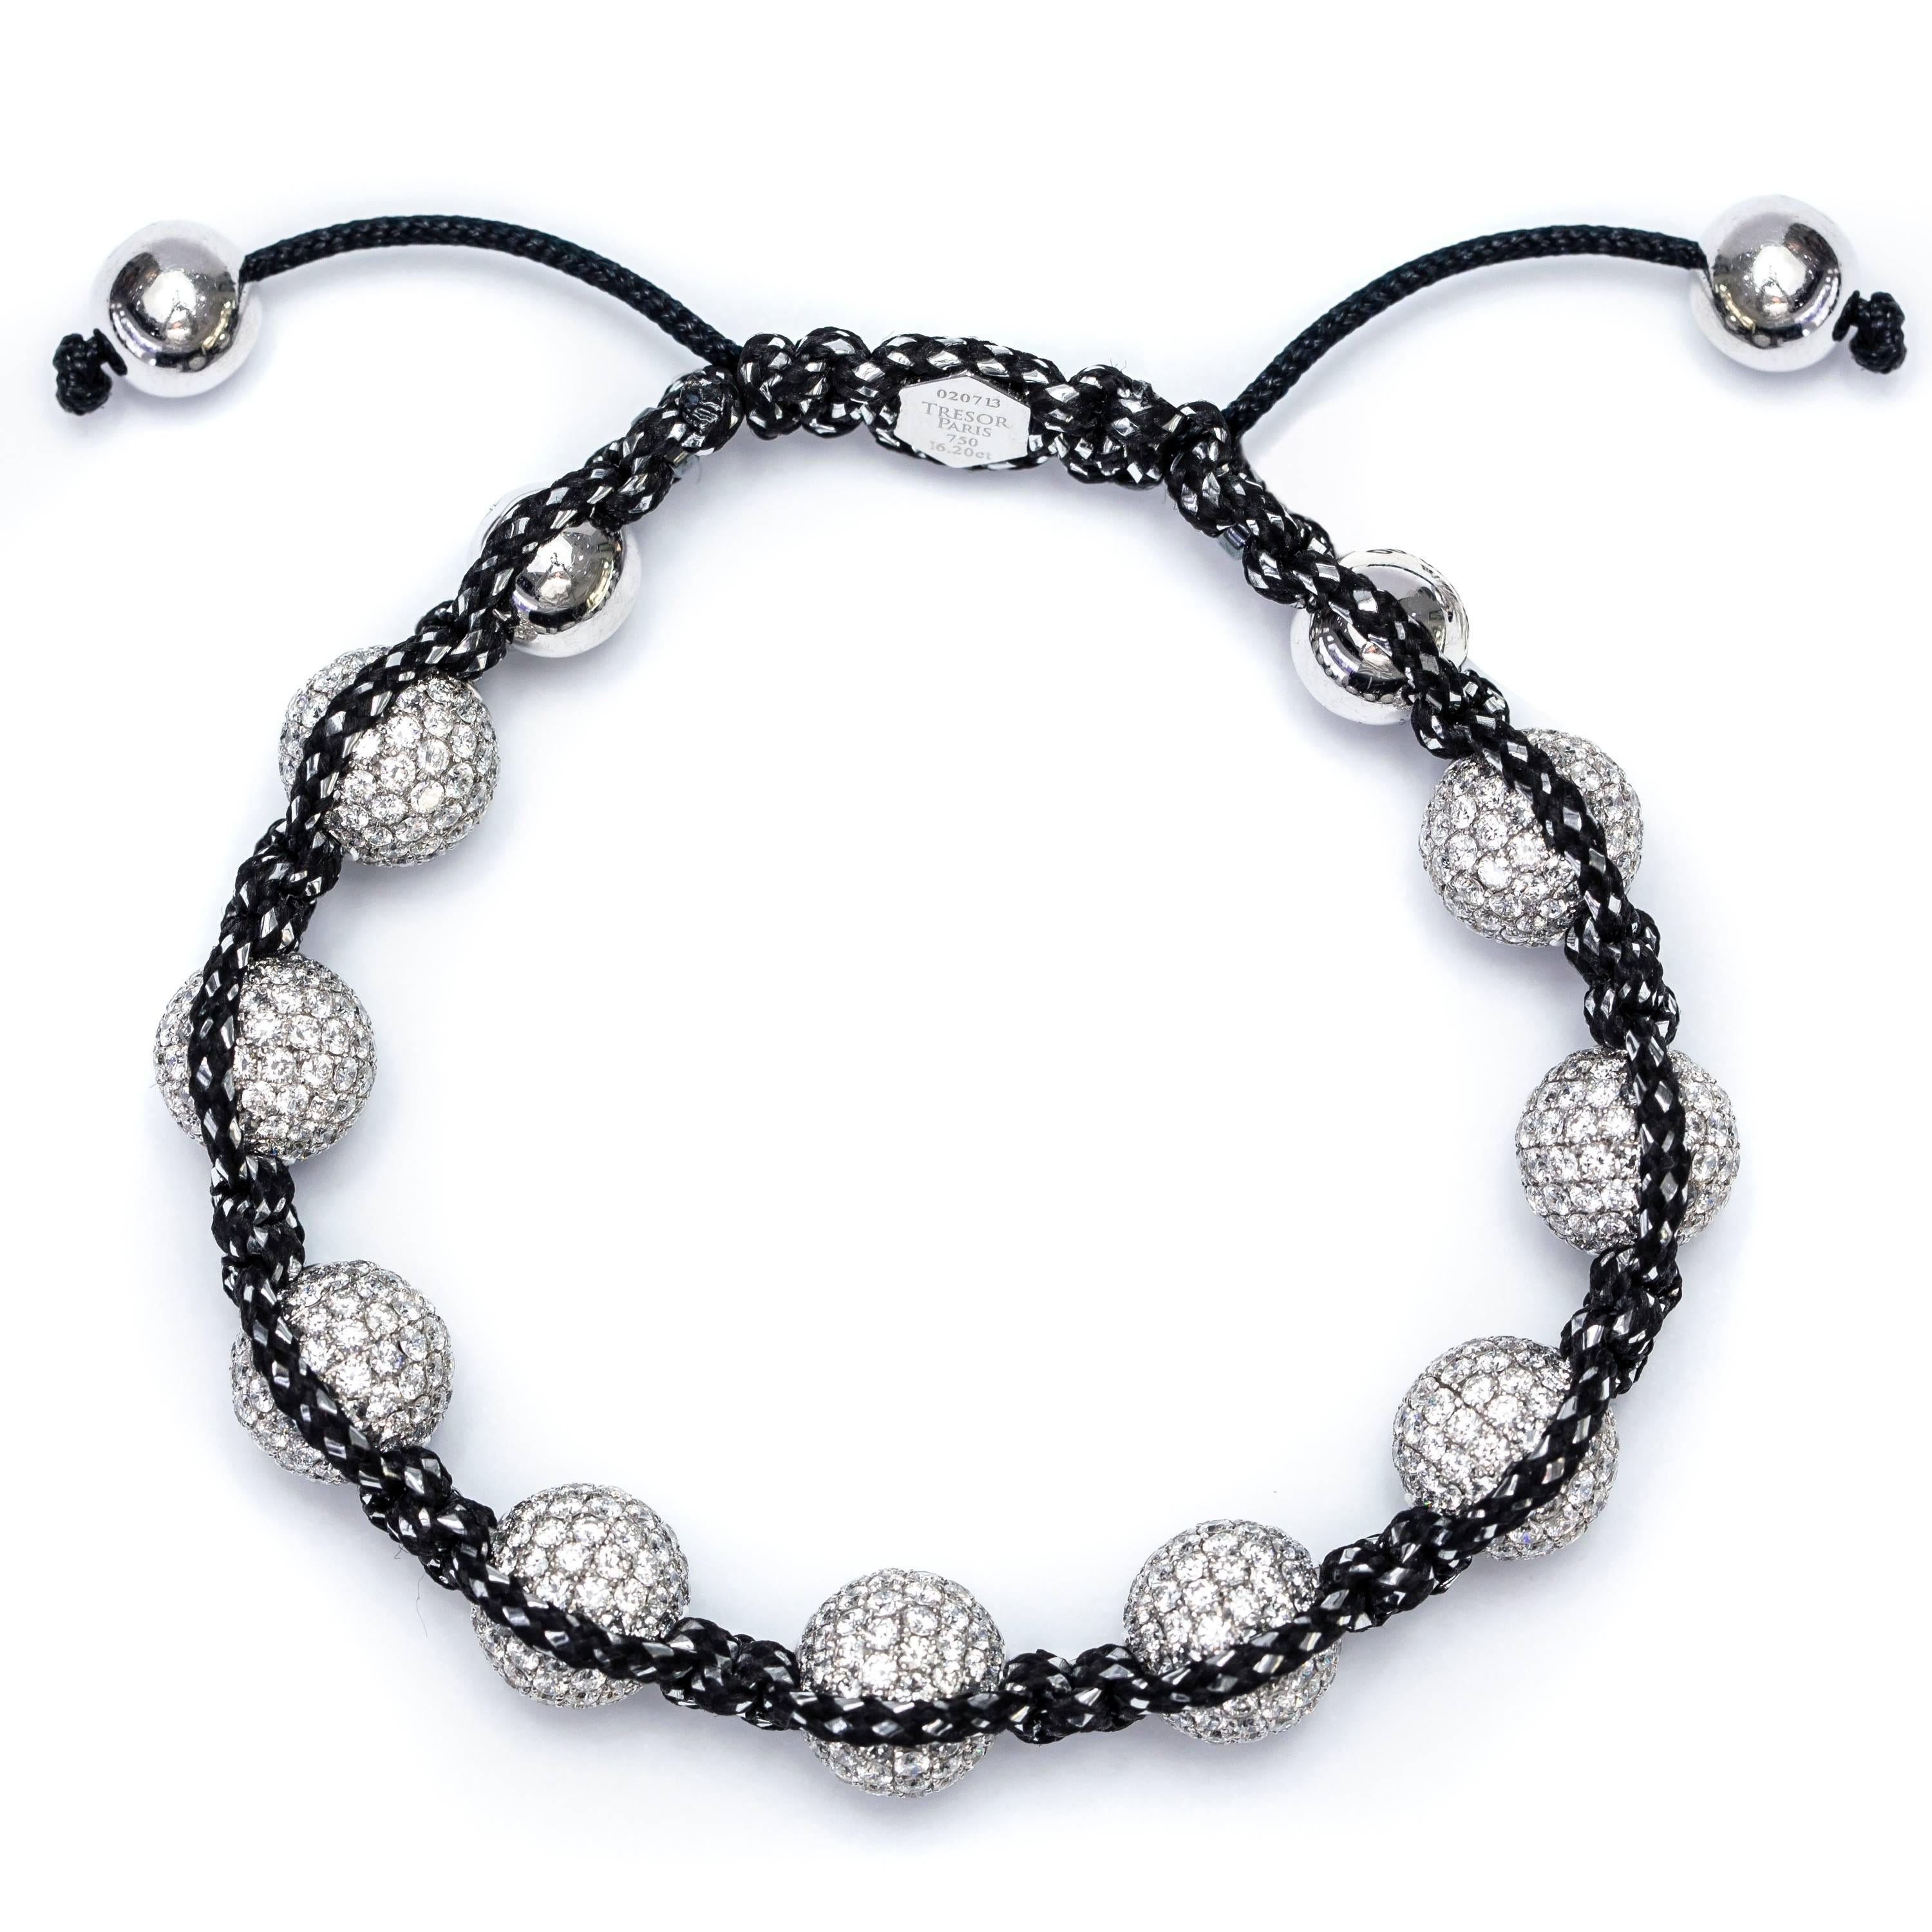 This stunning and bespoke 16.20 Carat Pave set Round Brilliant H-SI Diamond Ball bracelet from the Tresor Original Collection strung on Black and Silver Cord featuring a Silver Tresor Paris Logo. This classic bracelet made to the finest Artisan